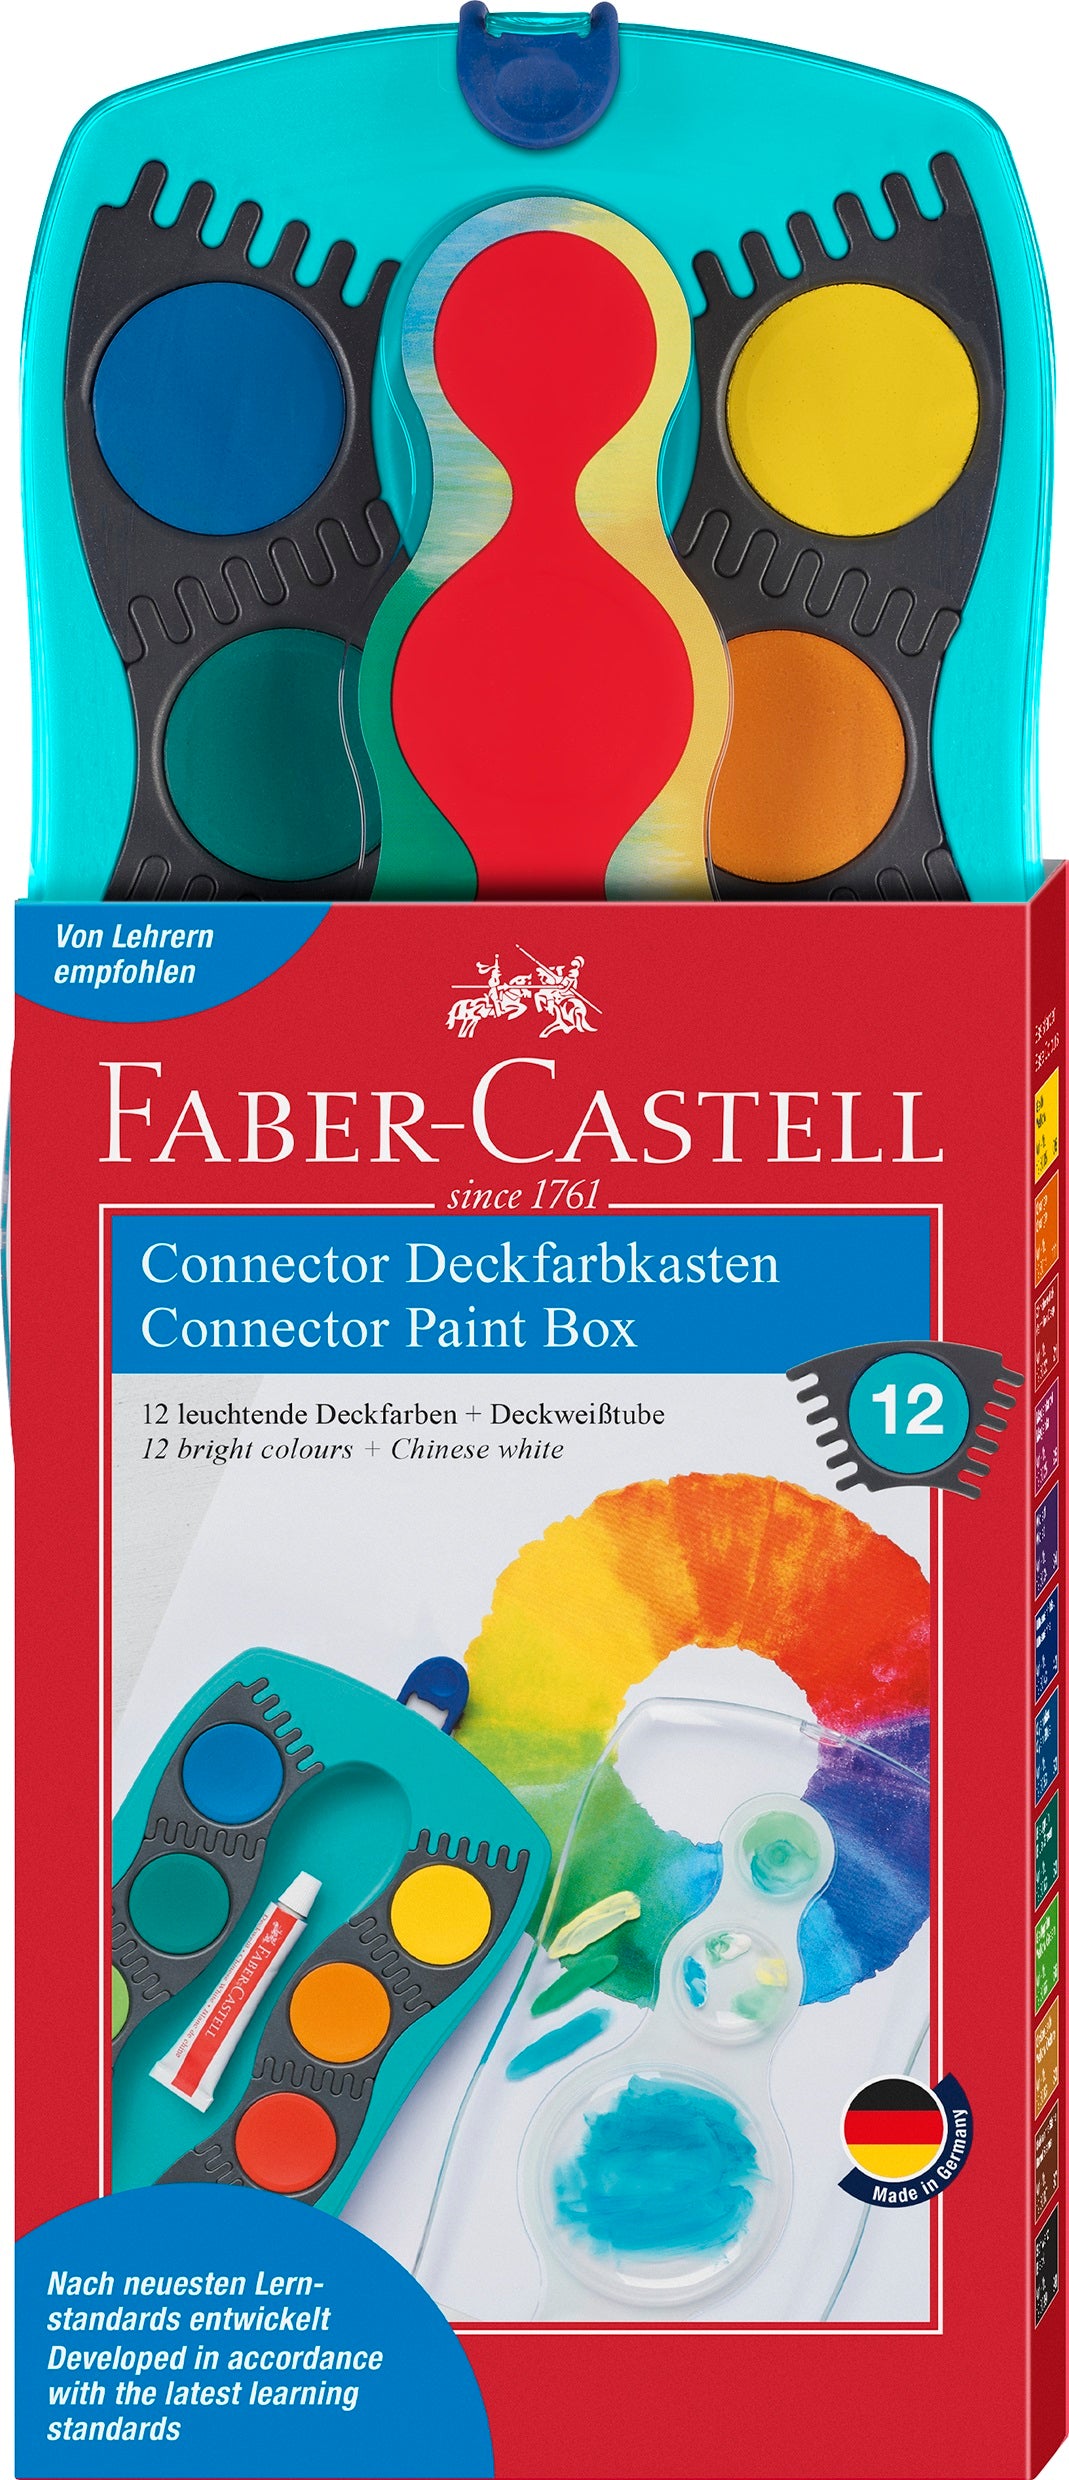 Retail packaging for a 12 colour paintbox by Faber Castell. The packaging has a red border and details of the product in the centre. The product is protruding from the top of the packaging.